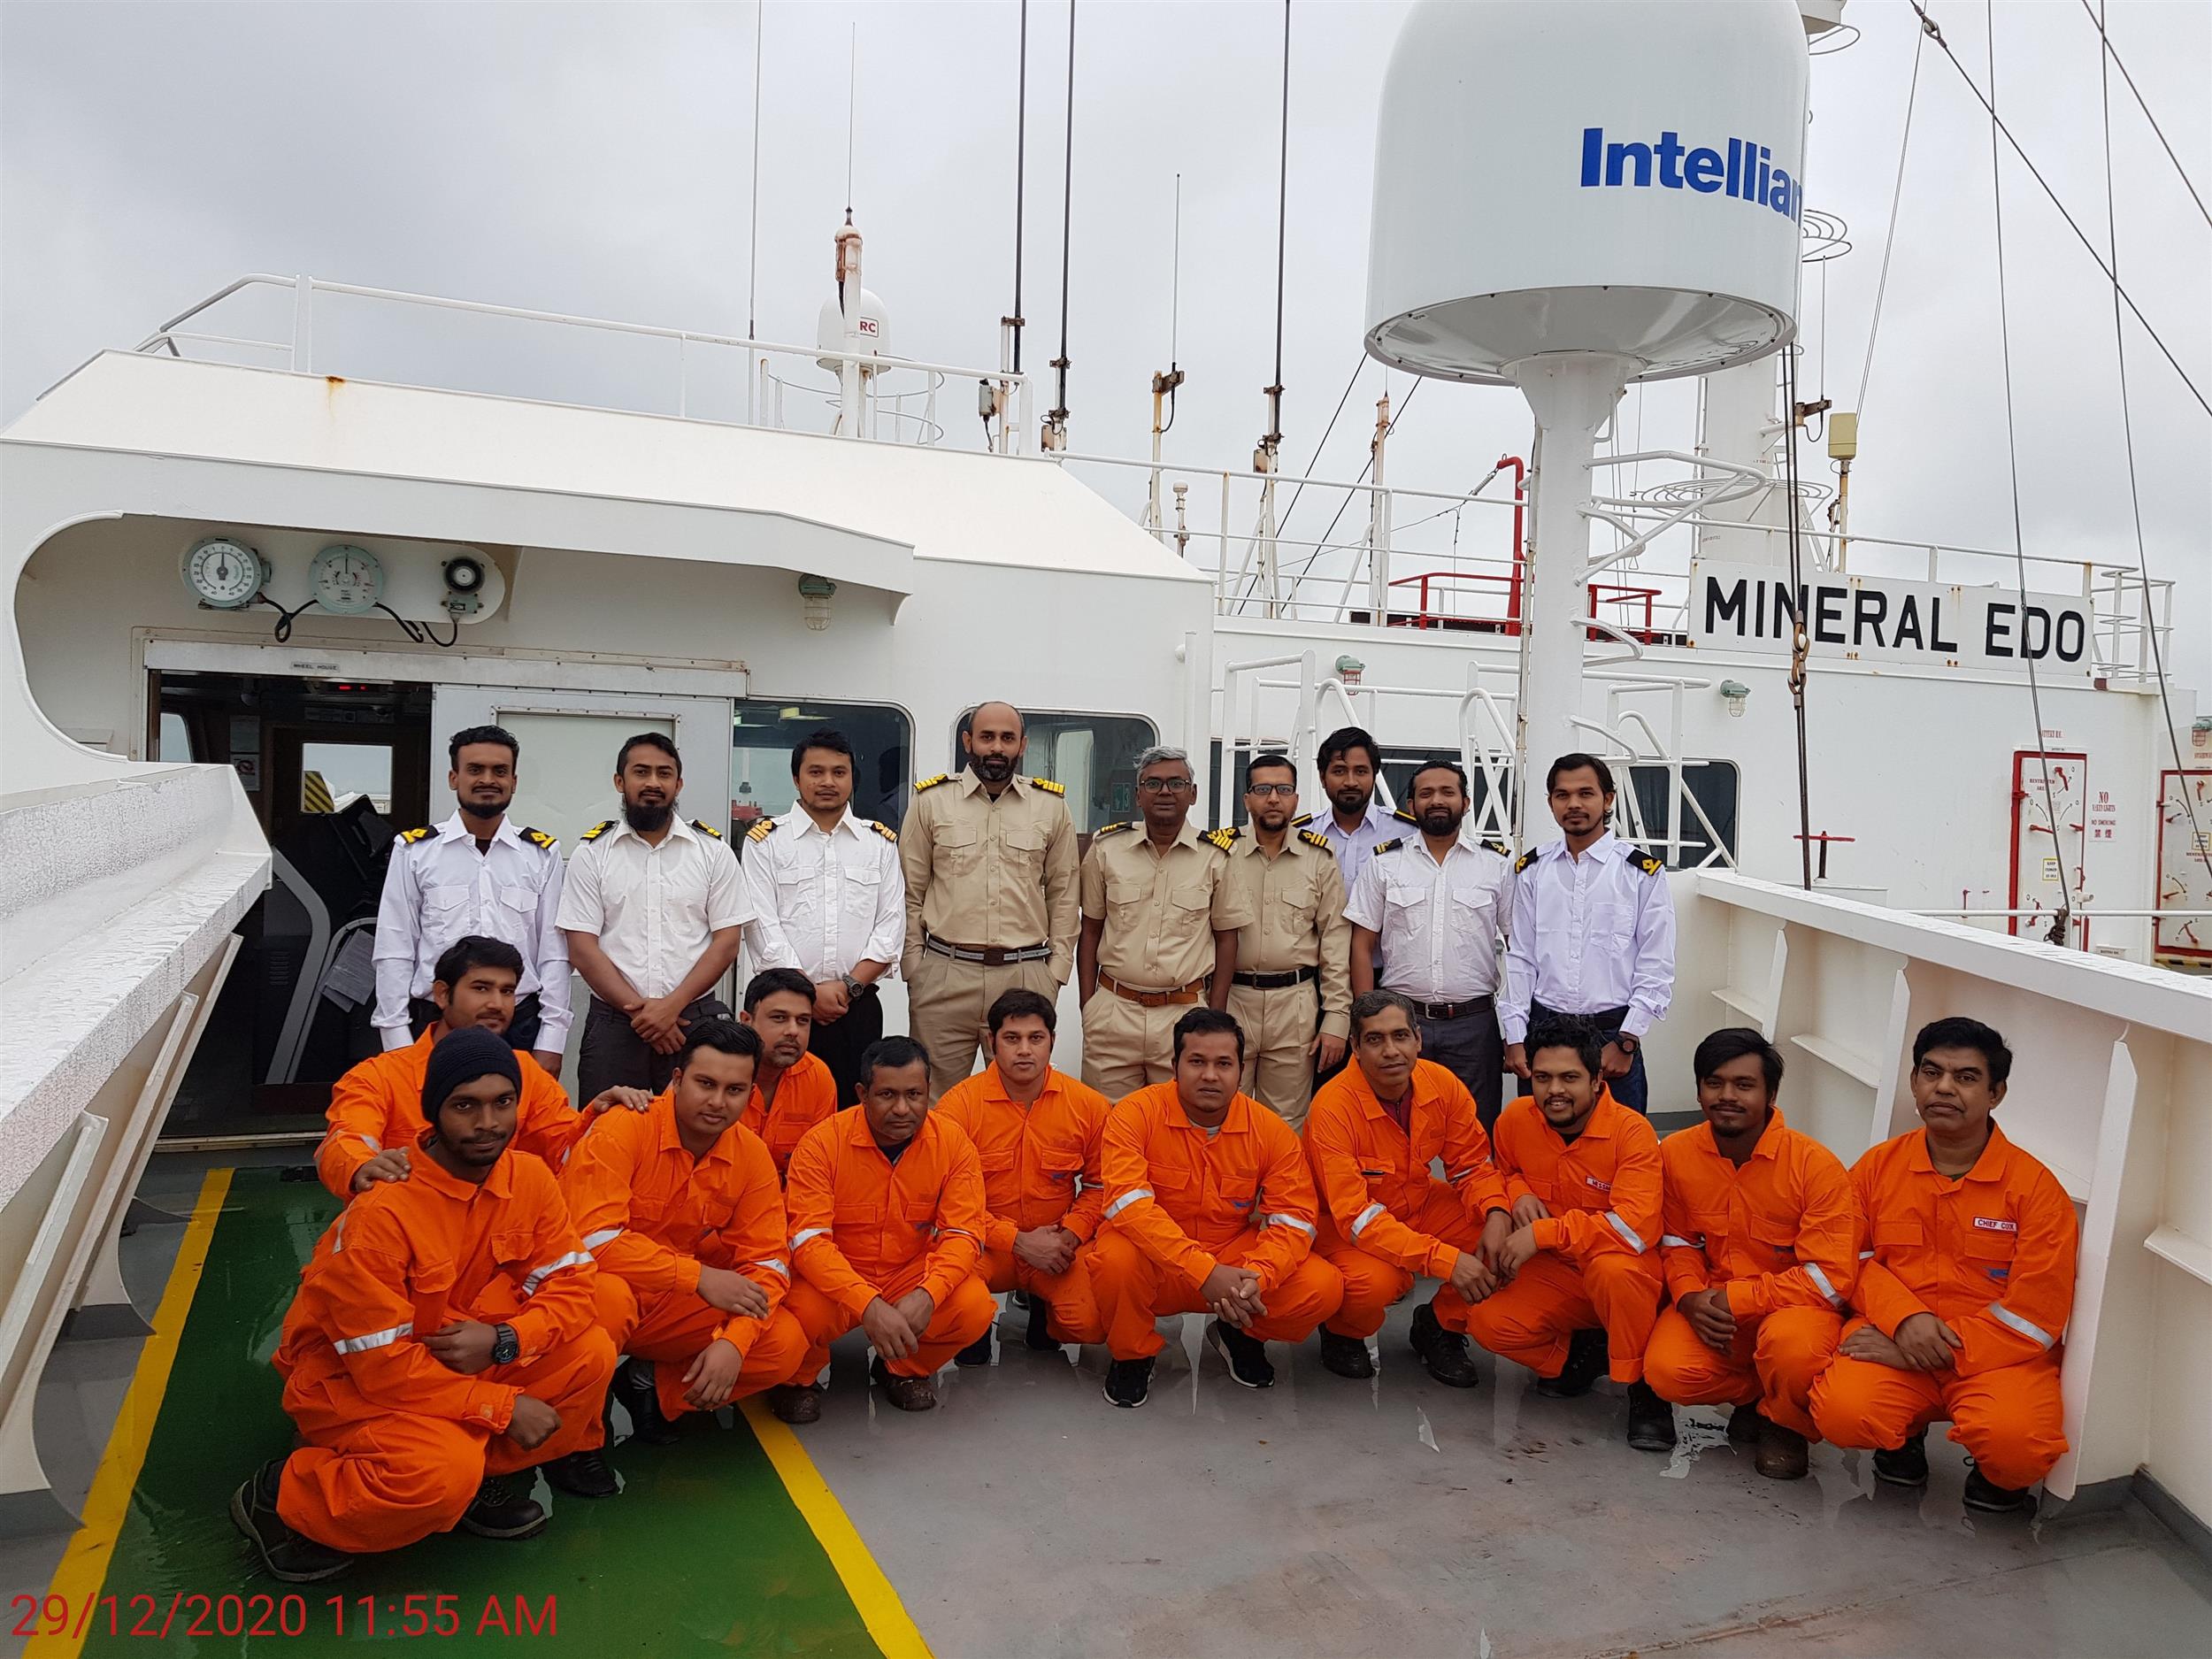 IMA Cadets Onboard on Taken over the vessel MV Mineral Edo by change of crew nationality